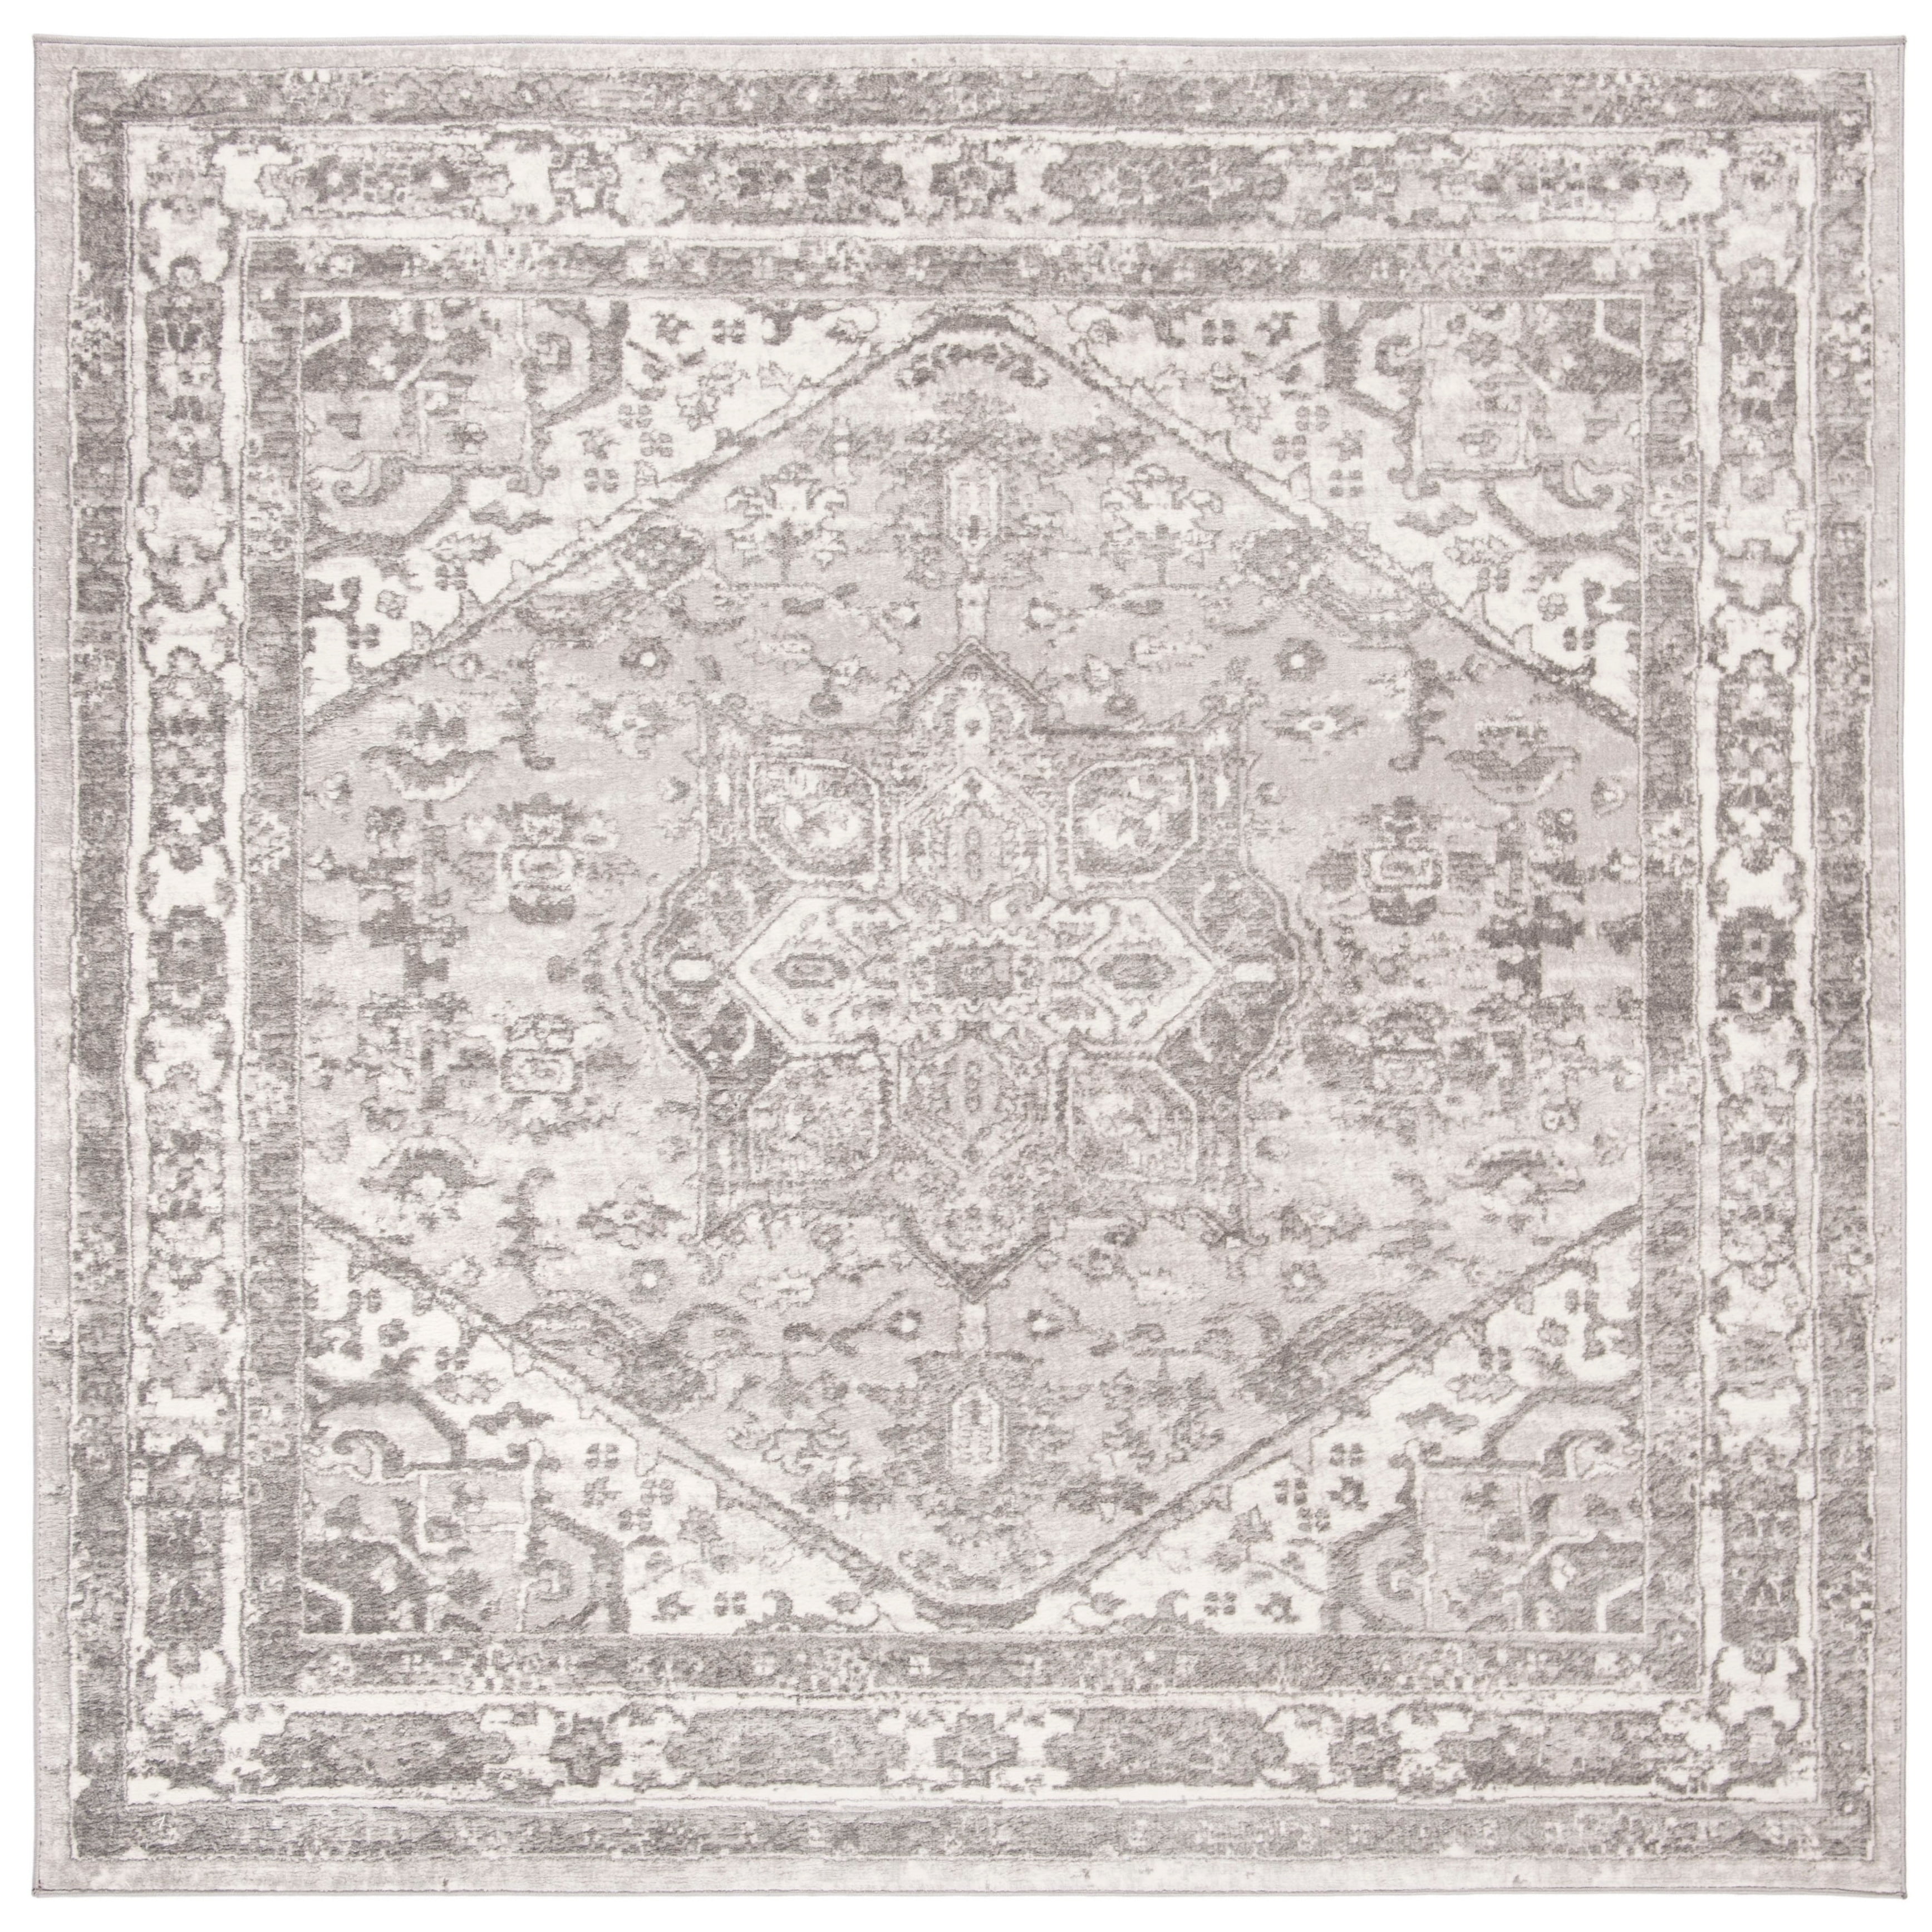 Cream Grey 10' x 13' SAFAVIEH Brentwood Collection BNT852B Medallion Distressed Non-Shedding Living Room Bedroom Dining Home Office Area Rug